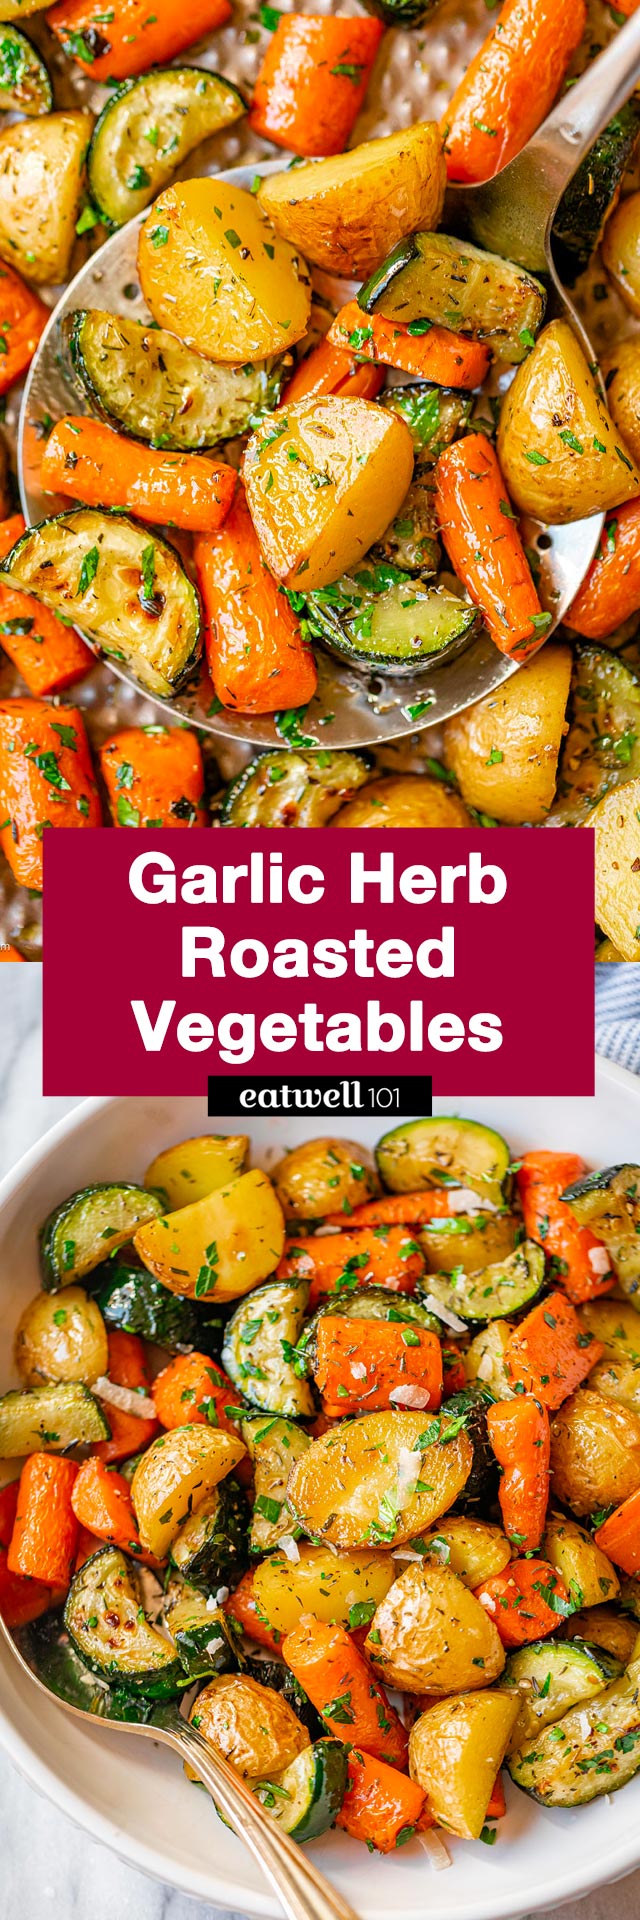 Garlic Herb Roasted Potatoes Carrots and Zucchini  - #roasted #potato #carrot #zucchini #recipe #eatwell101 - These roasted vegetables make a great savory side dish that comes together in no time and pairs well with just about anything!